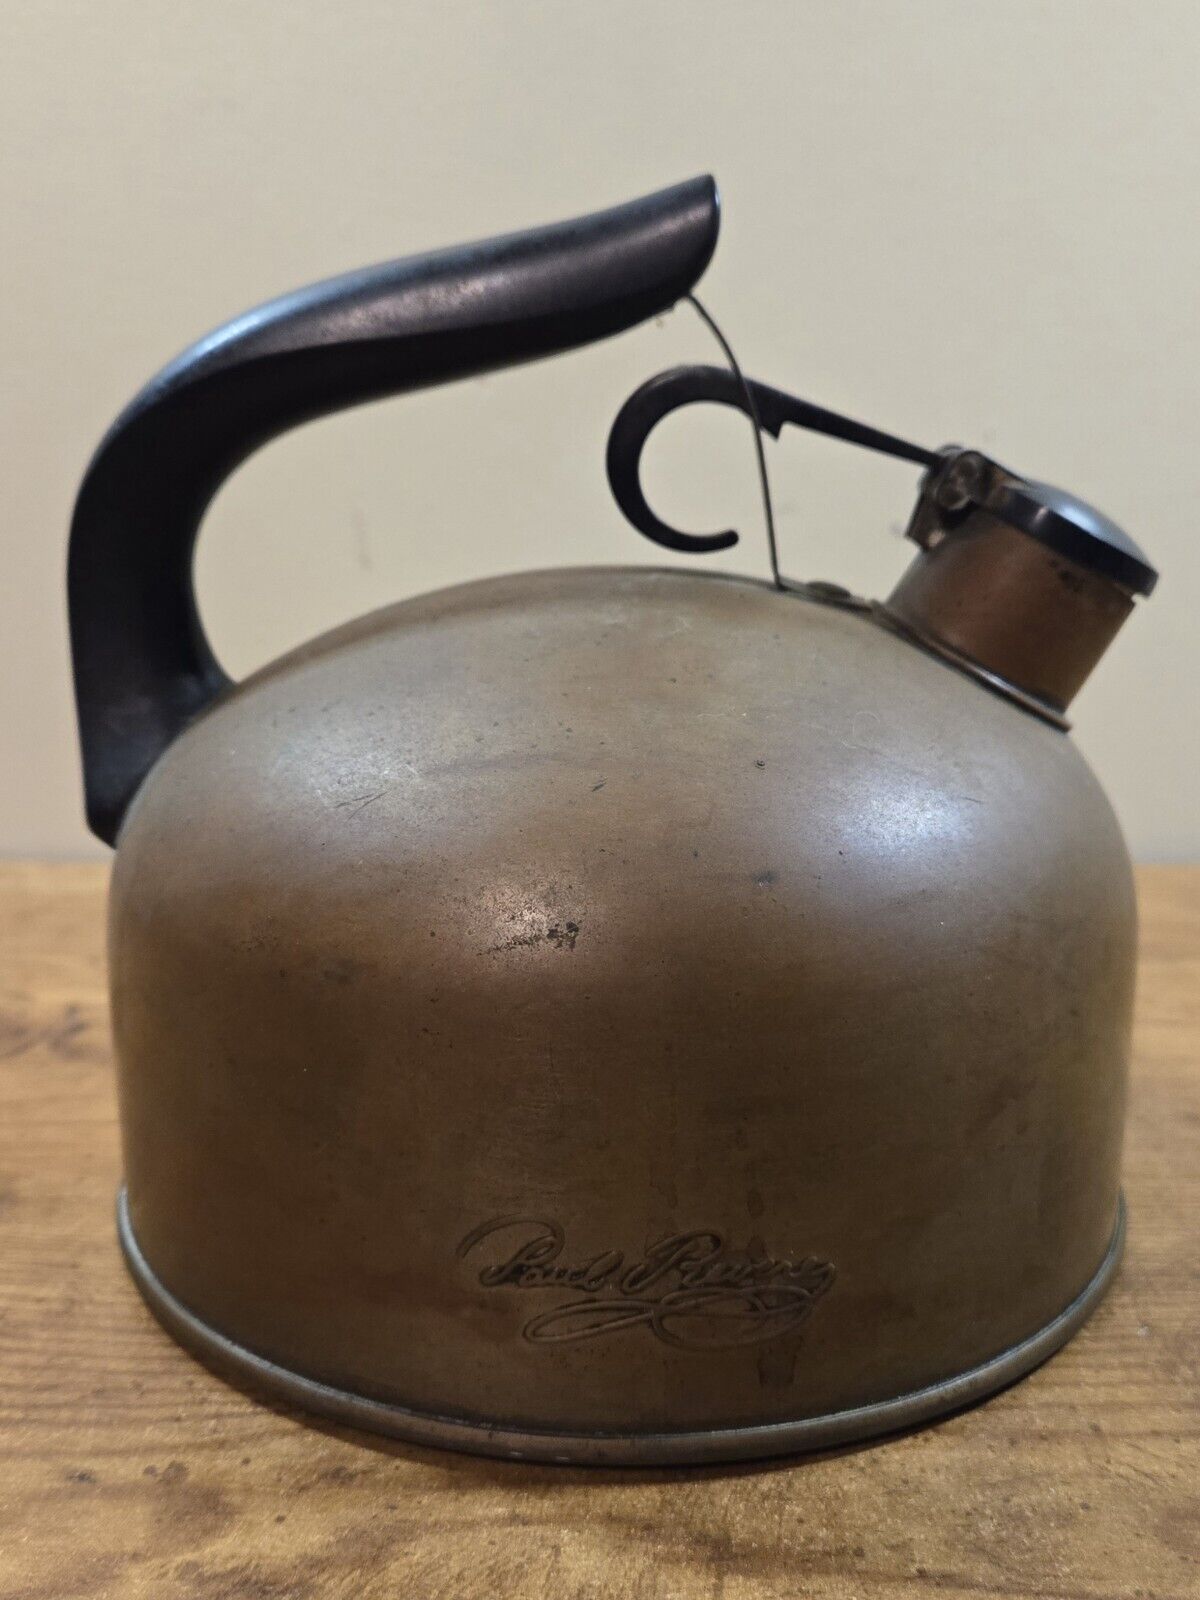 Vintage Paul Revere Ware Copper Kettle, Needs Polished, Preowned